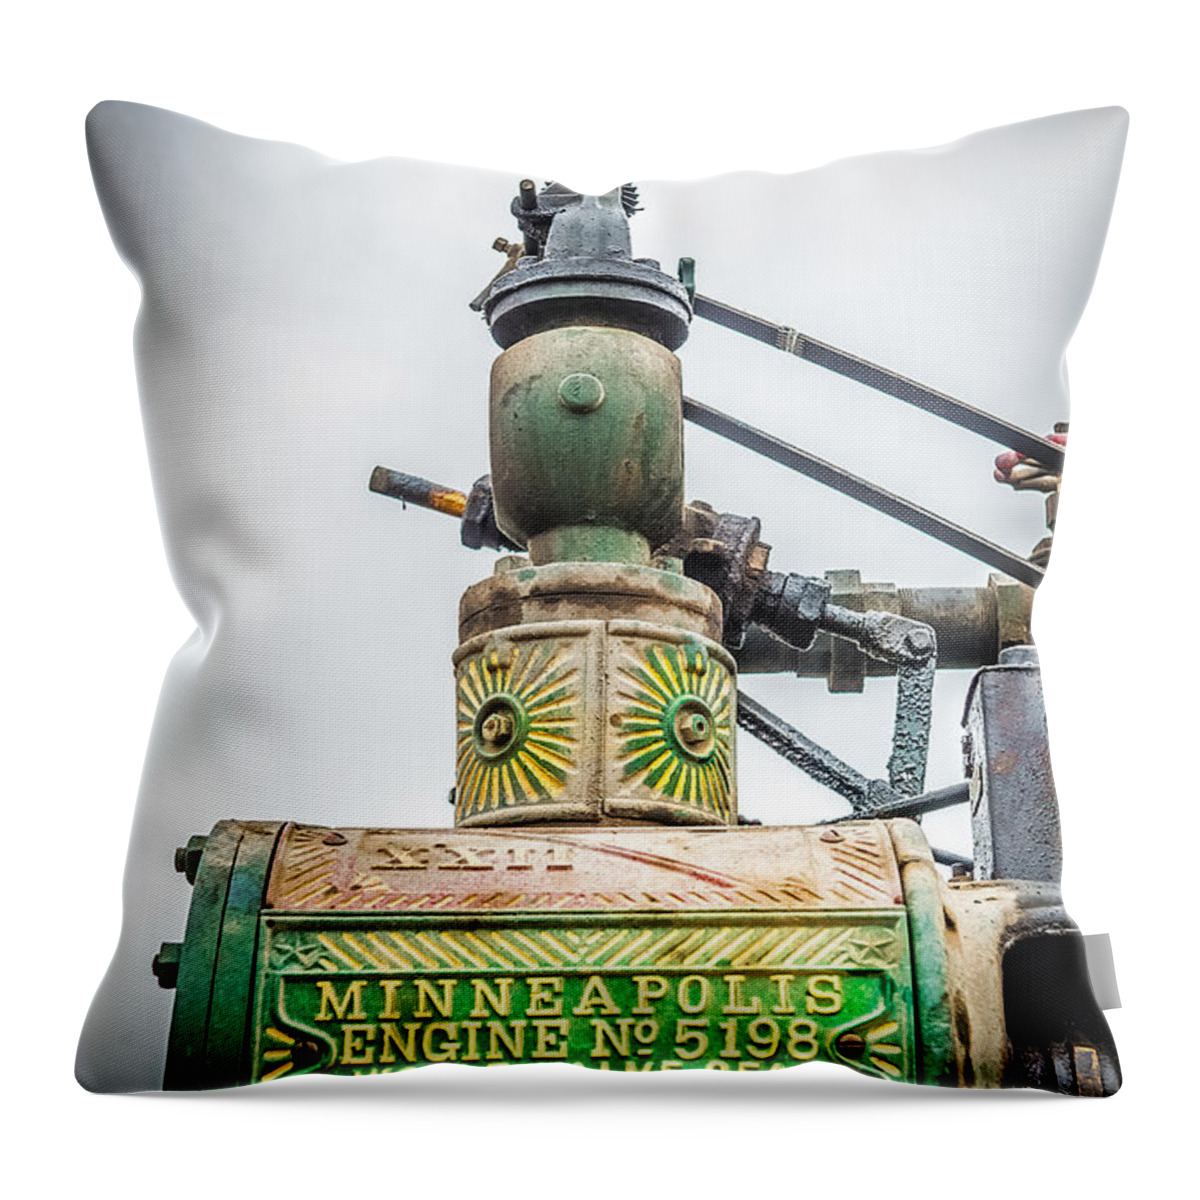 Governor Throw Pillow featuring the photograph Minneapolis Steam Engine by Paul Freidlund